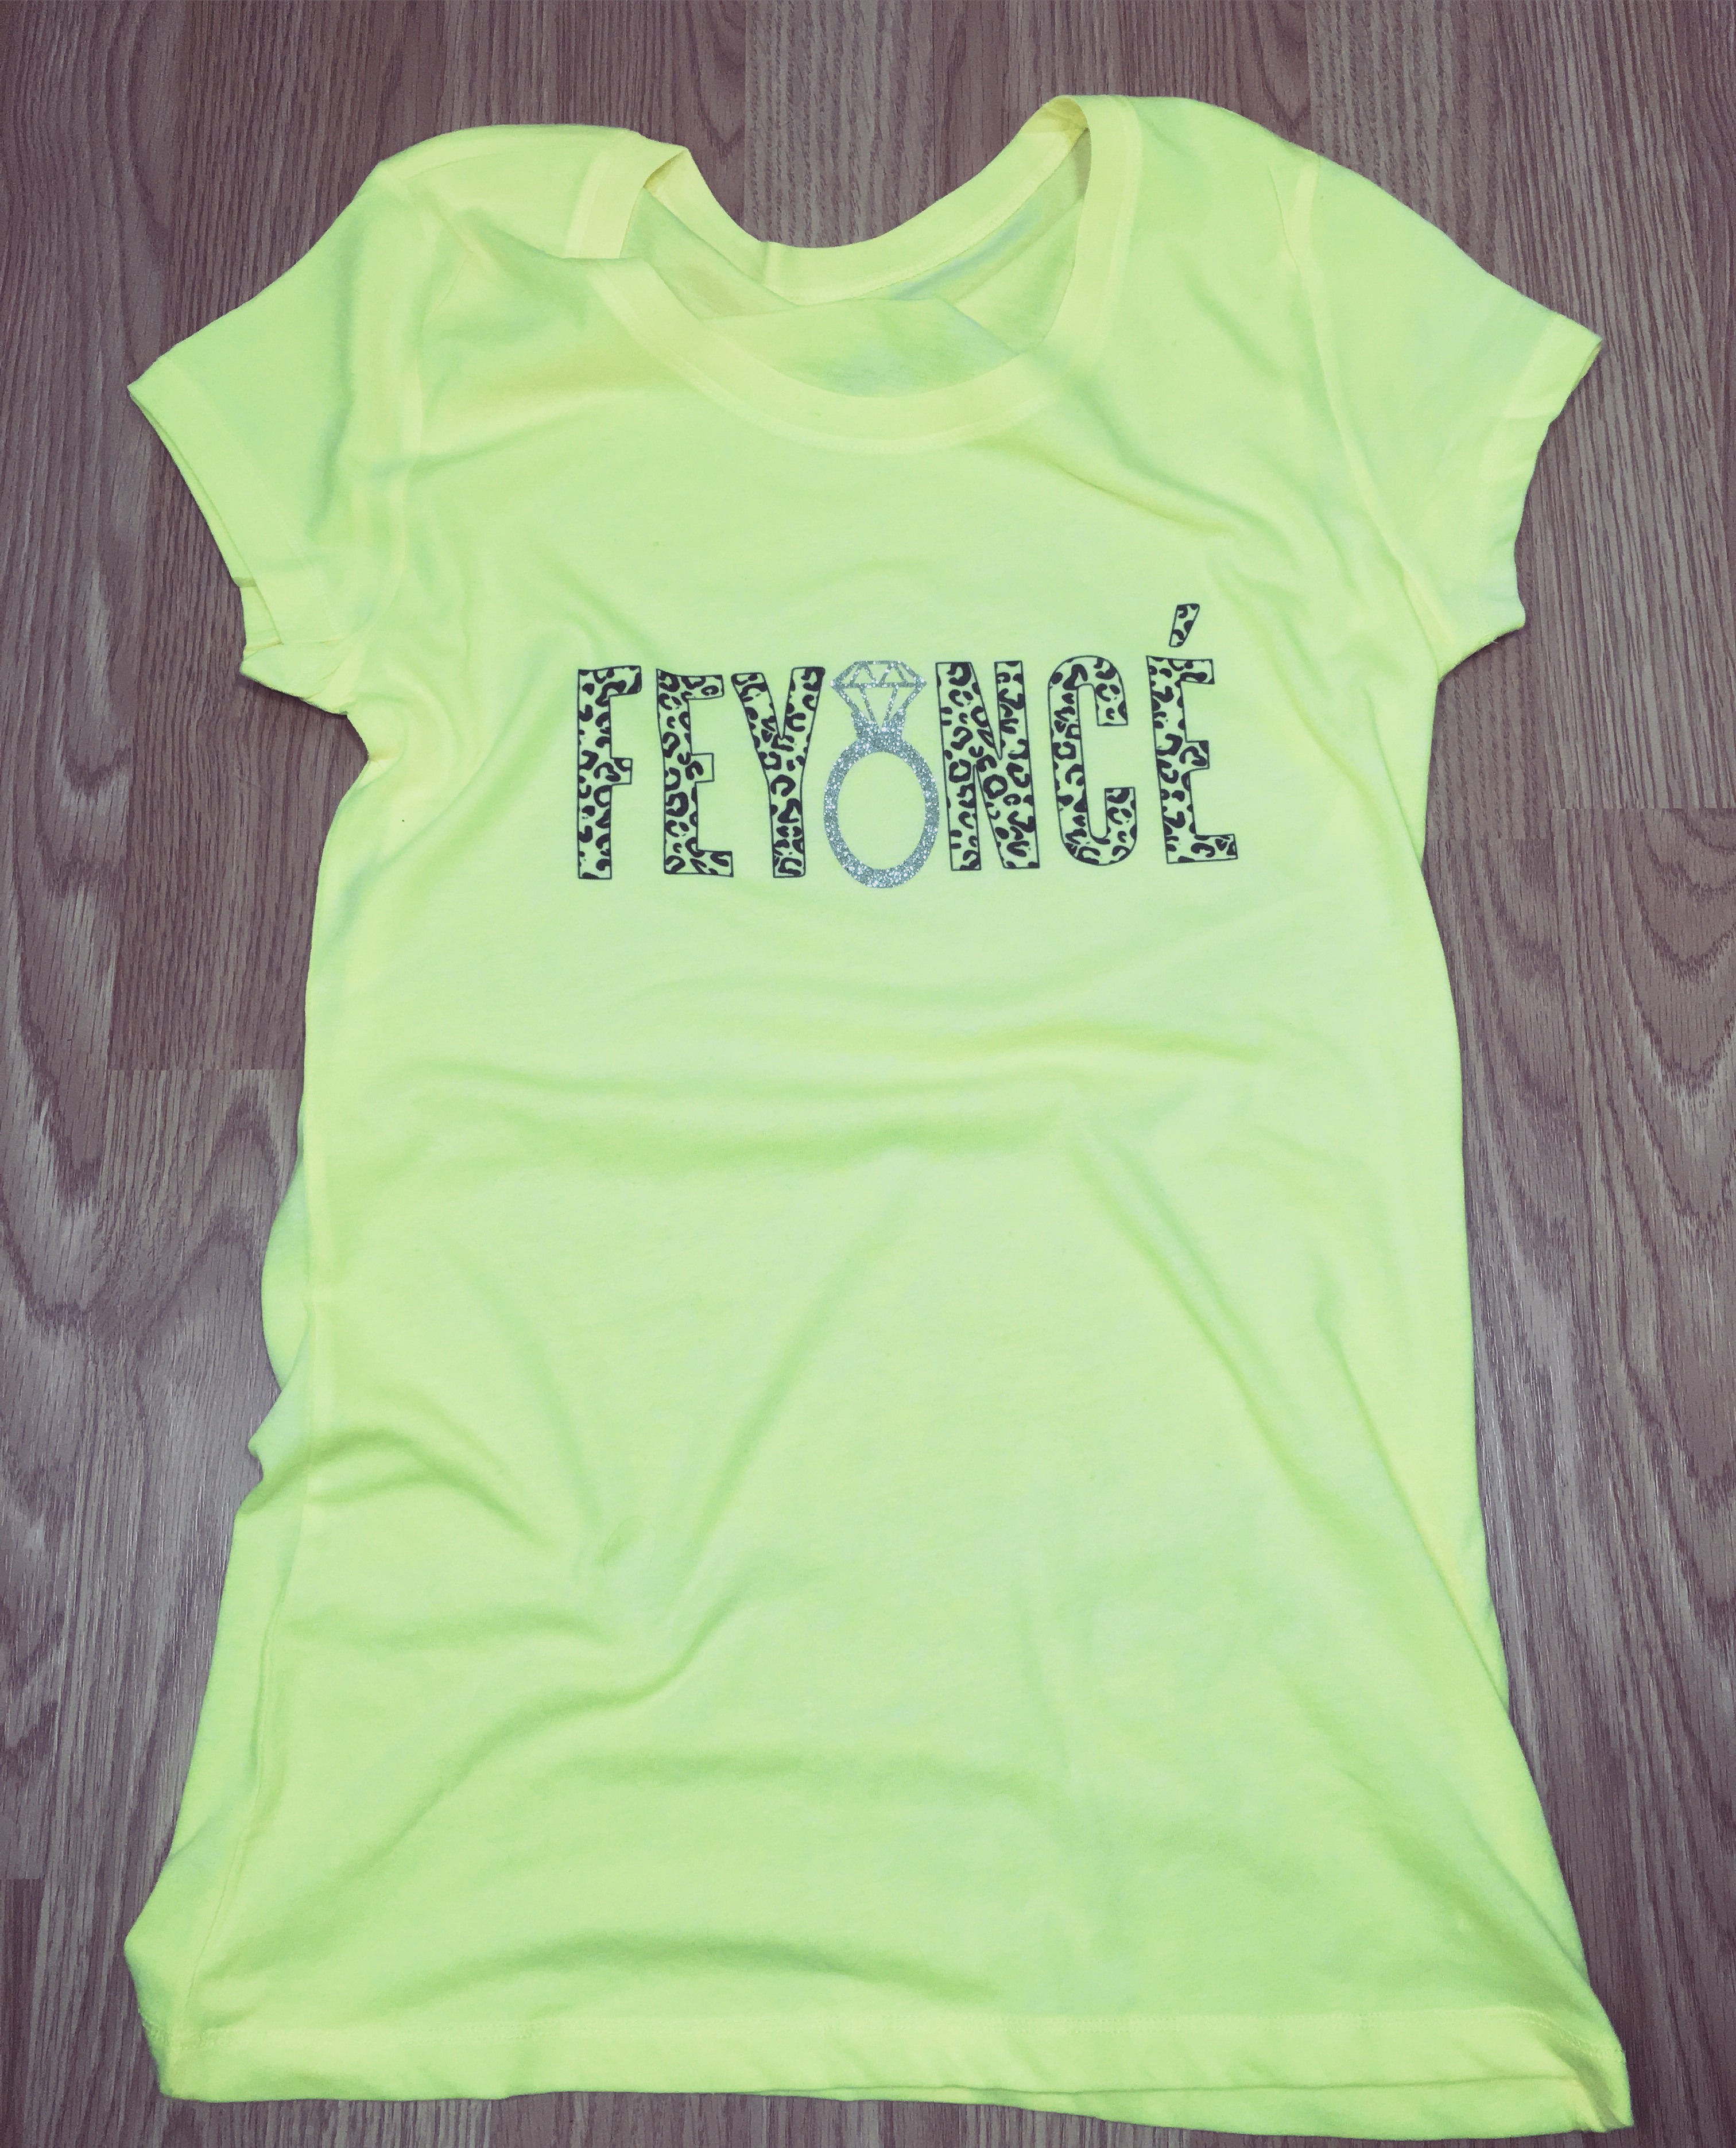 FeyoncÃ© made with sublimation printing